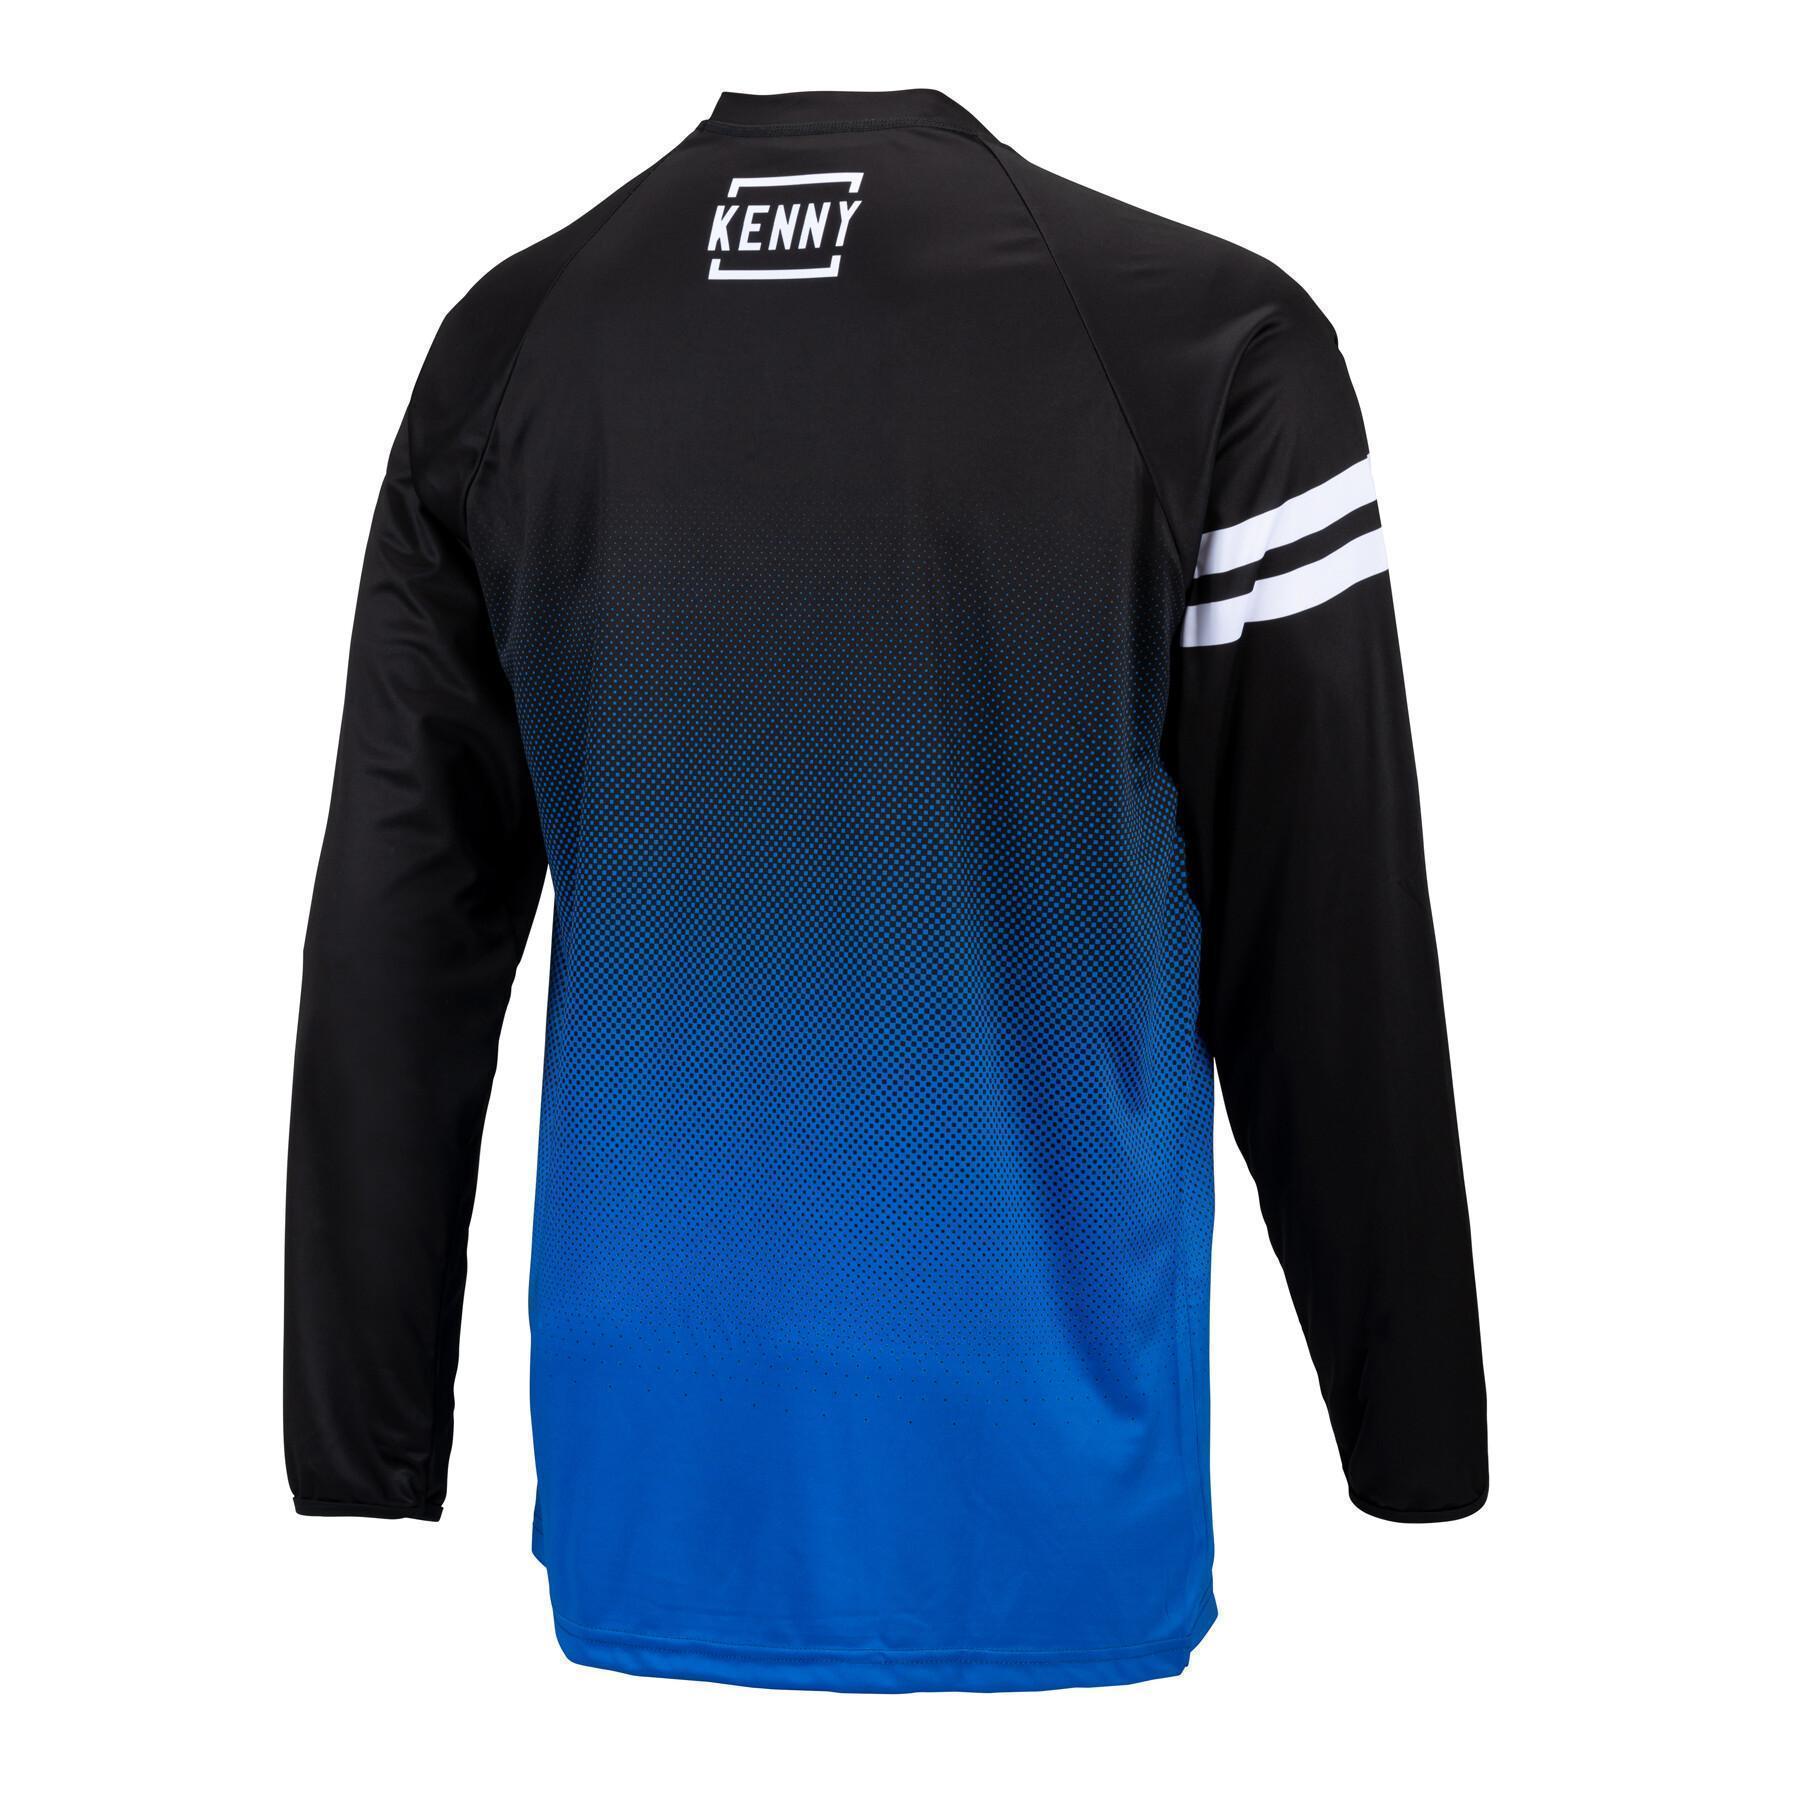 Maillot manches longues Kenny Elite